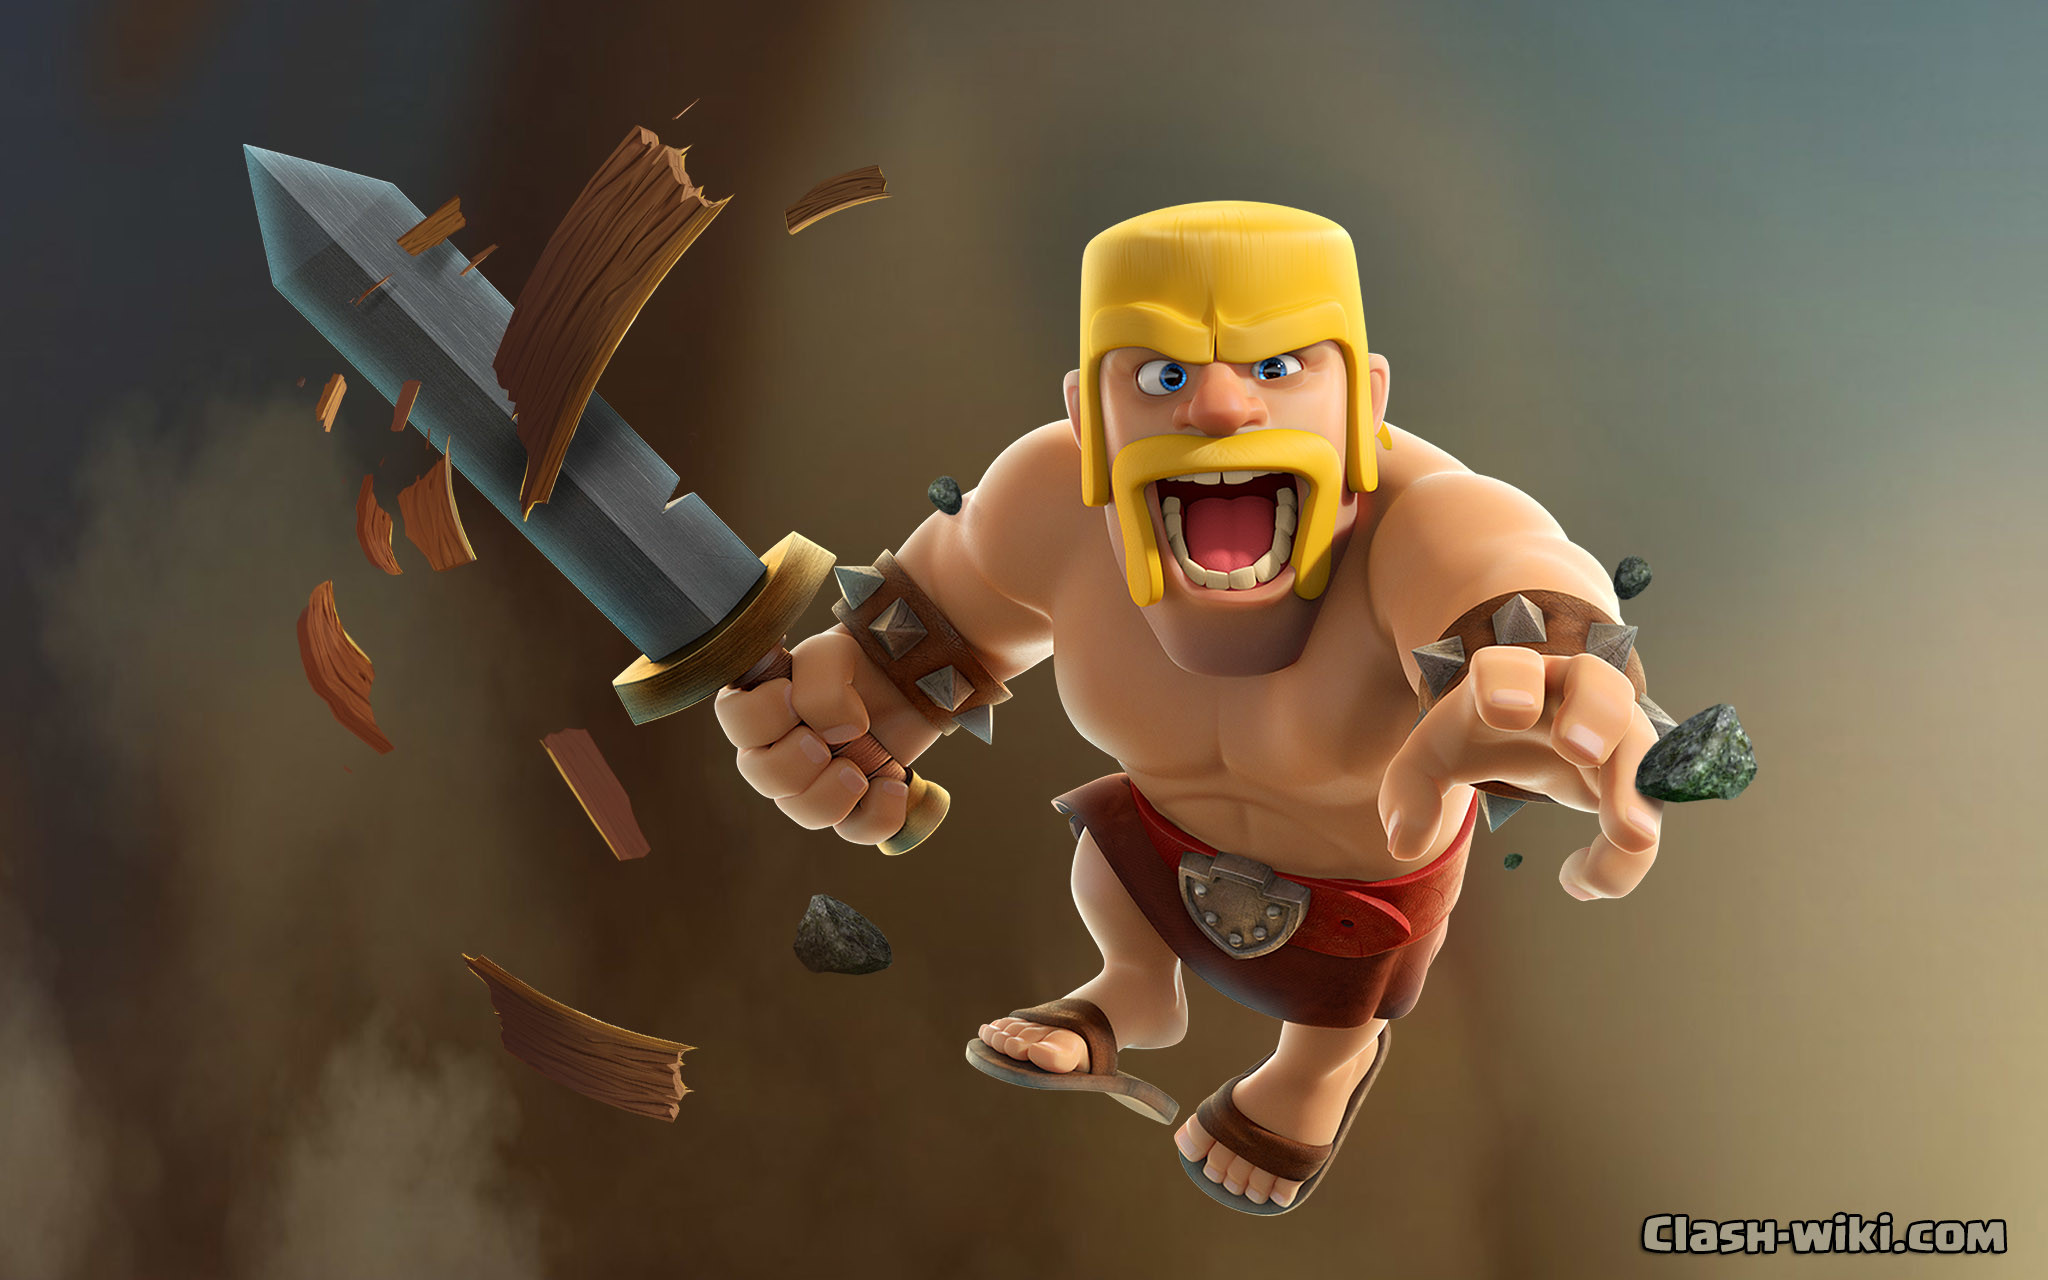 2048x1280 Clash of Clans Wallpapers clash wikicom 